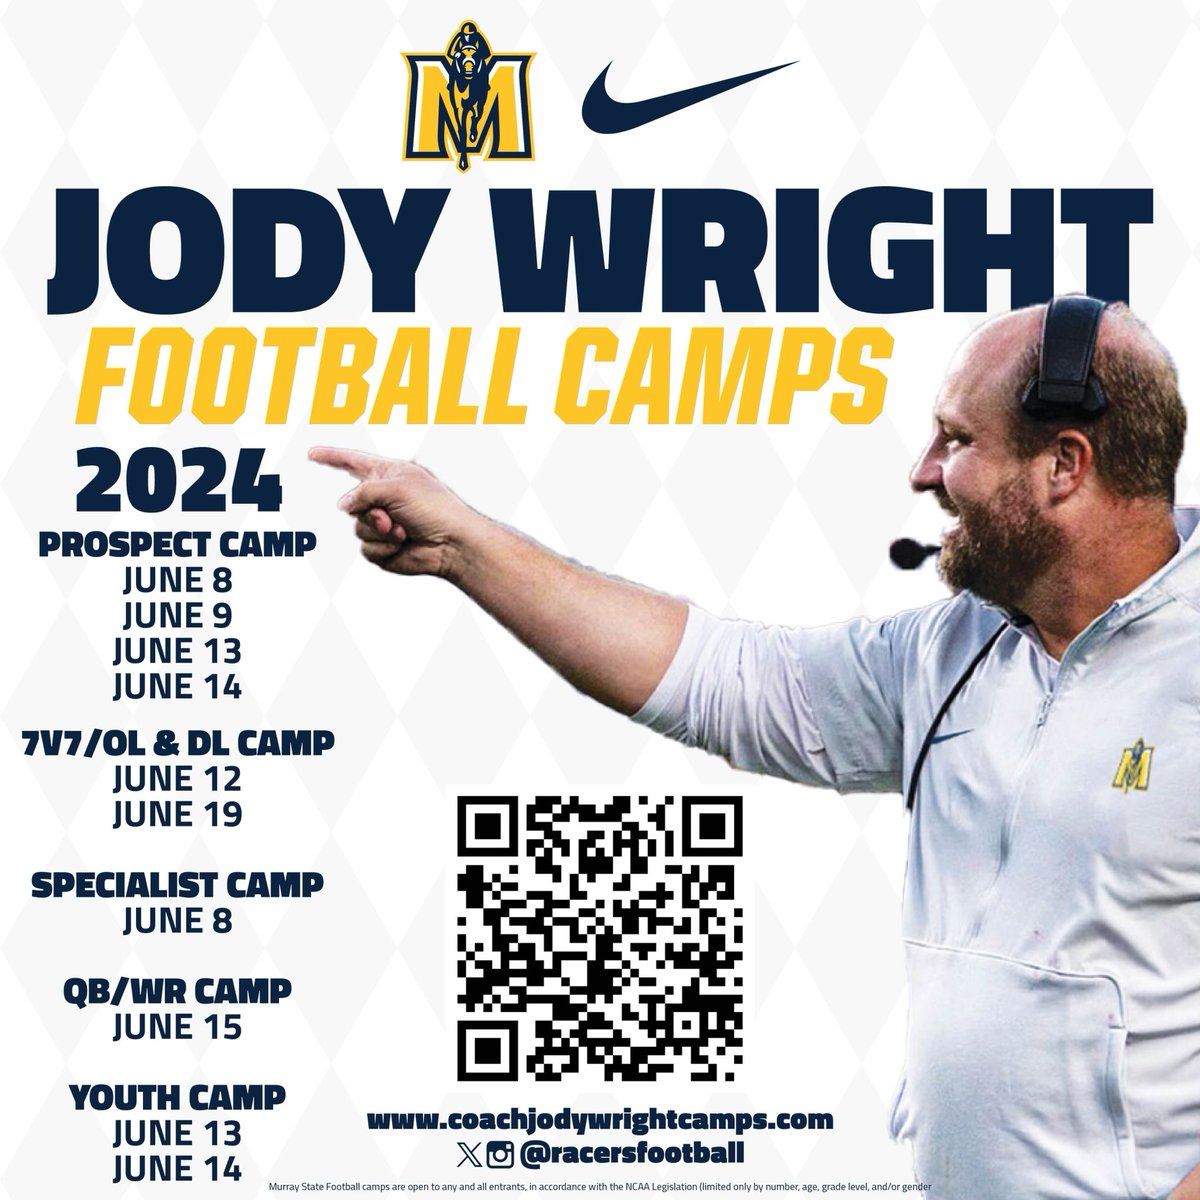 Come visit Murray KY, it’s an unbelievable place to raise a family and an even better University to attend! Summer Camps will be elite!! @WrightJody